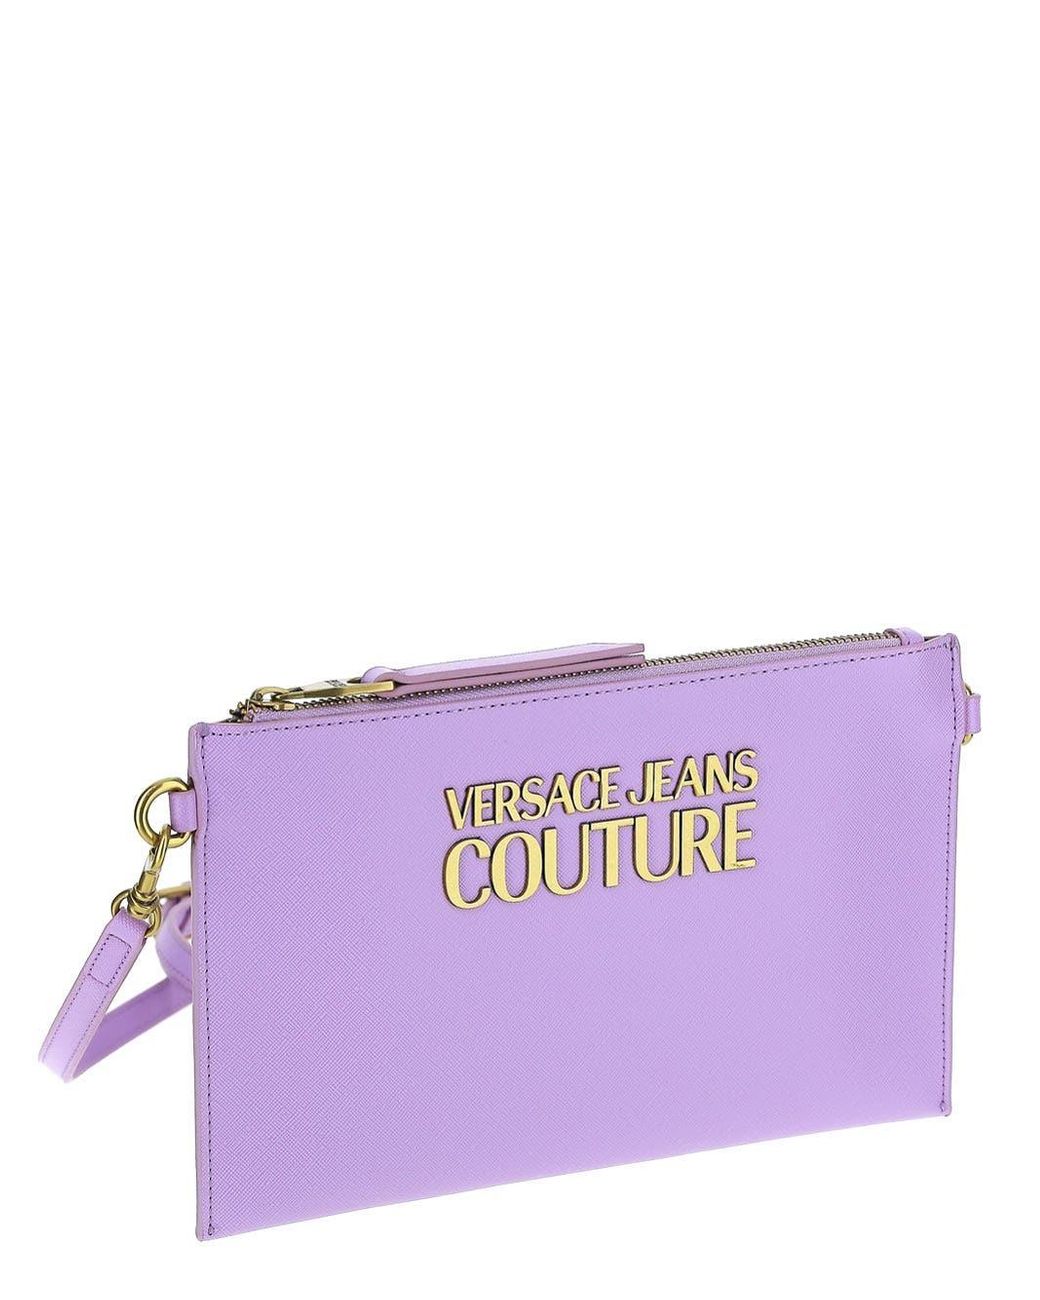 Versace Jeans Couture Denim Lilac Crossbody Bag in Purple | Lyst